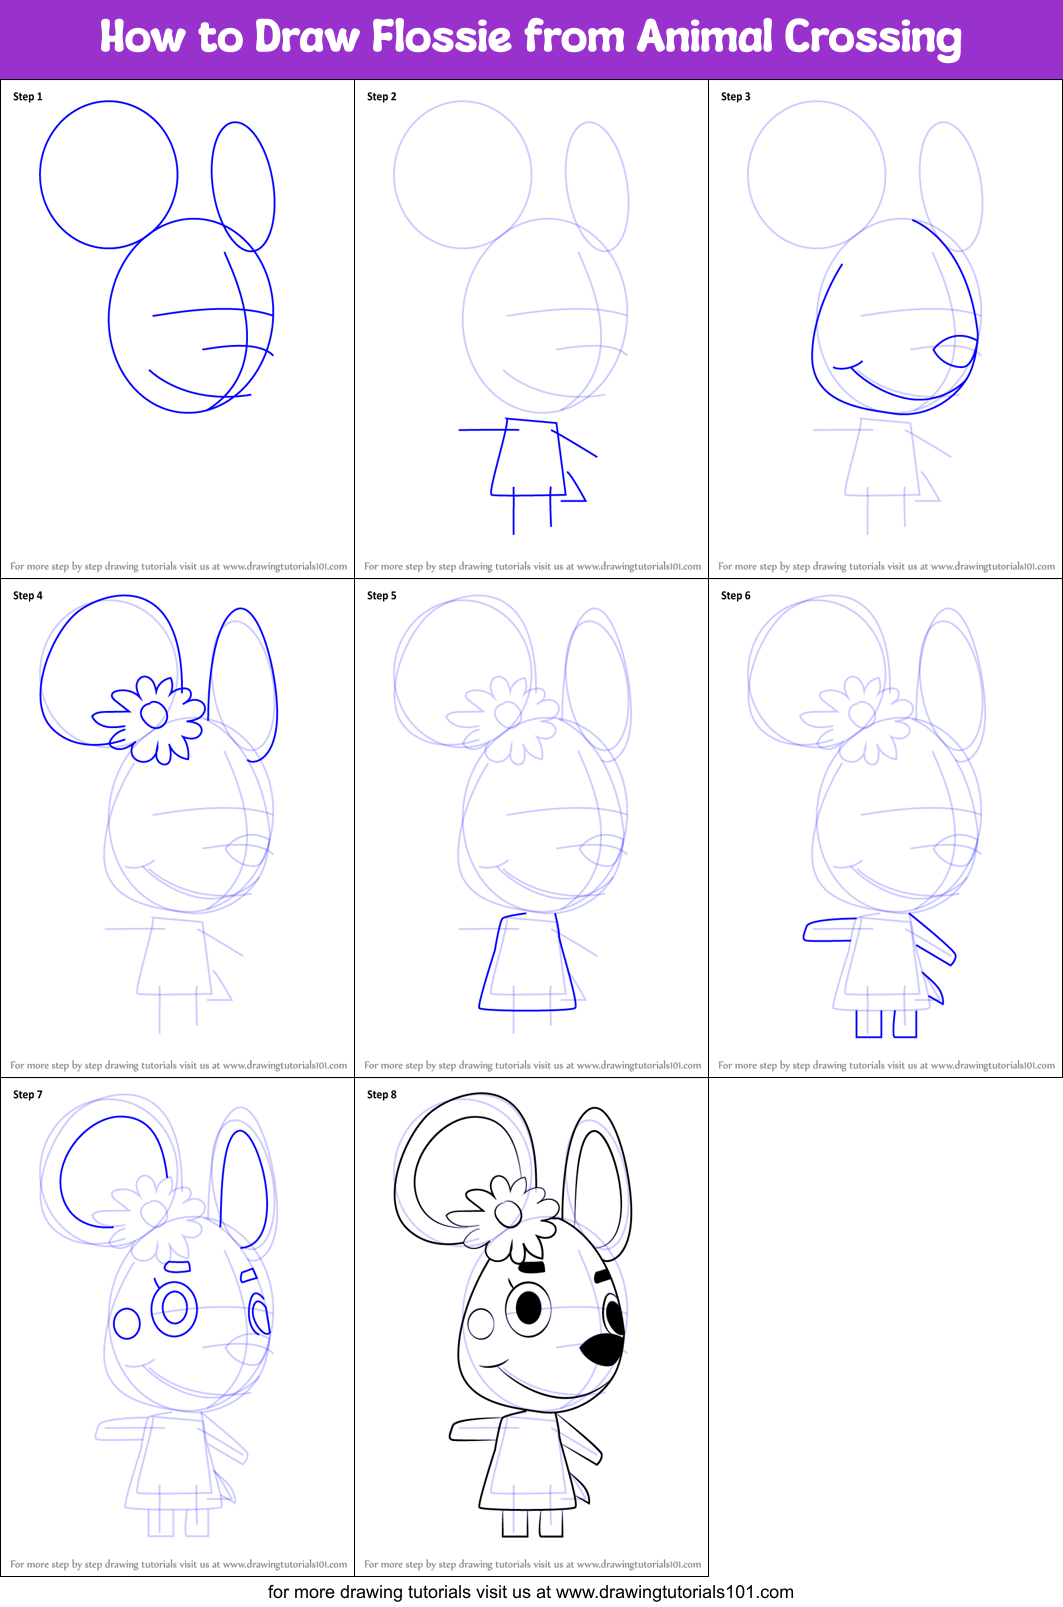 How to Draw Flossie from Animal Crossing (Animal Crossing) Step by Step ...